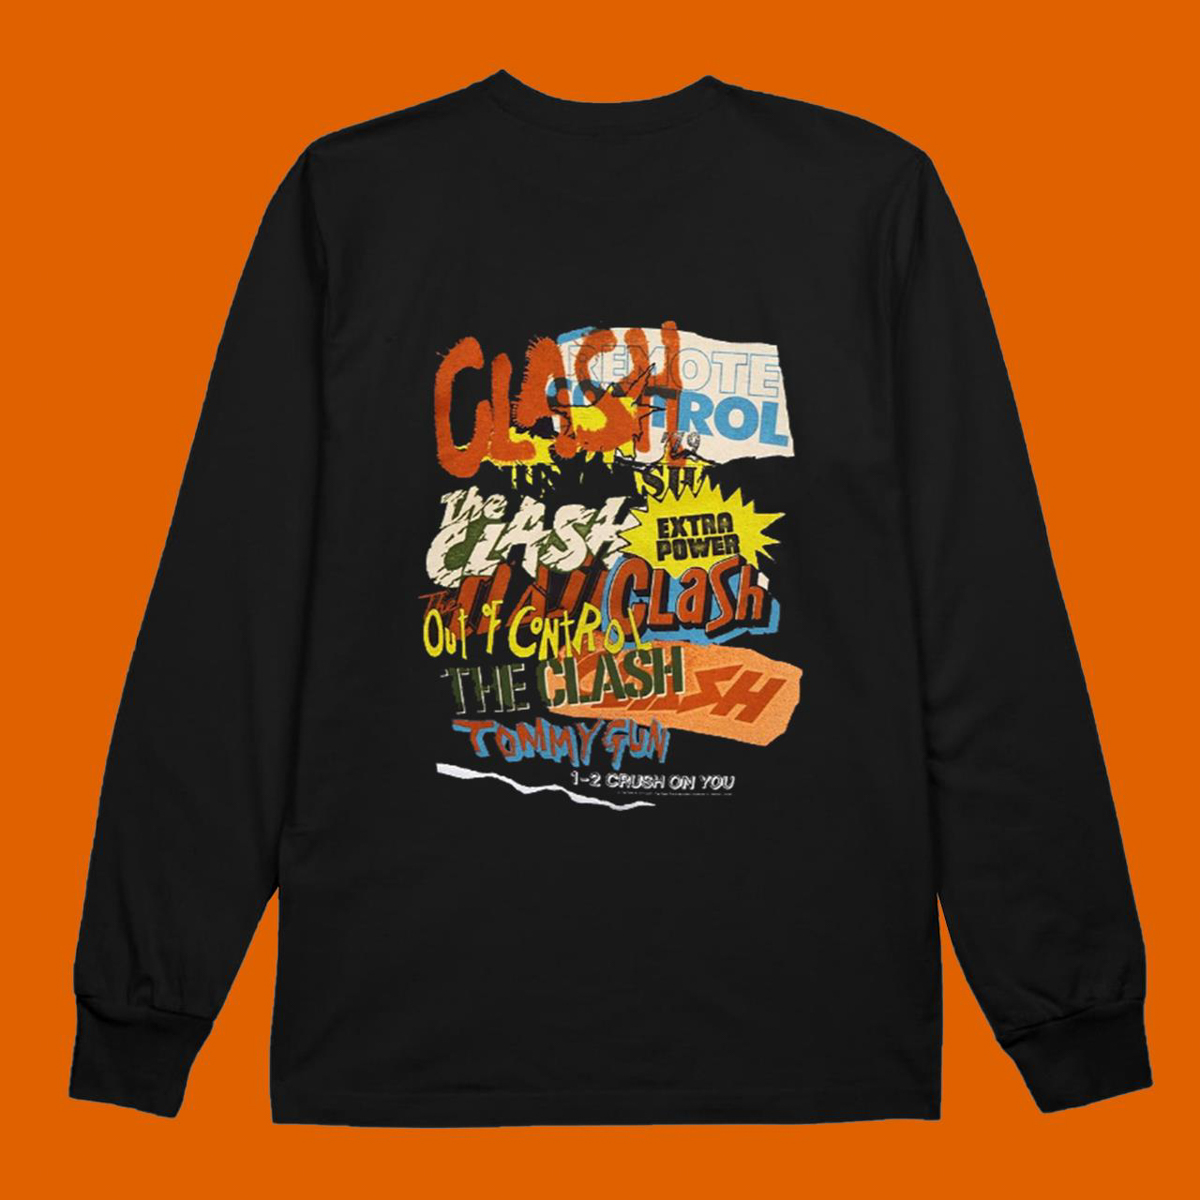 The Clash Repeating Text Vintage T-Shirt